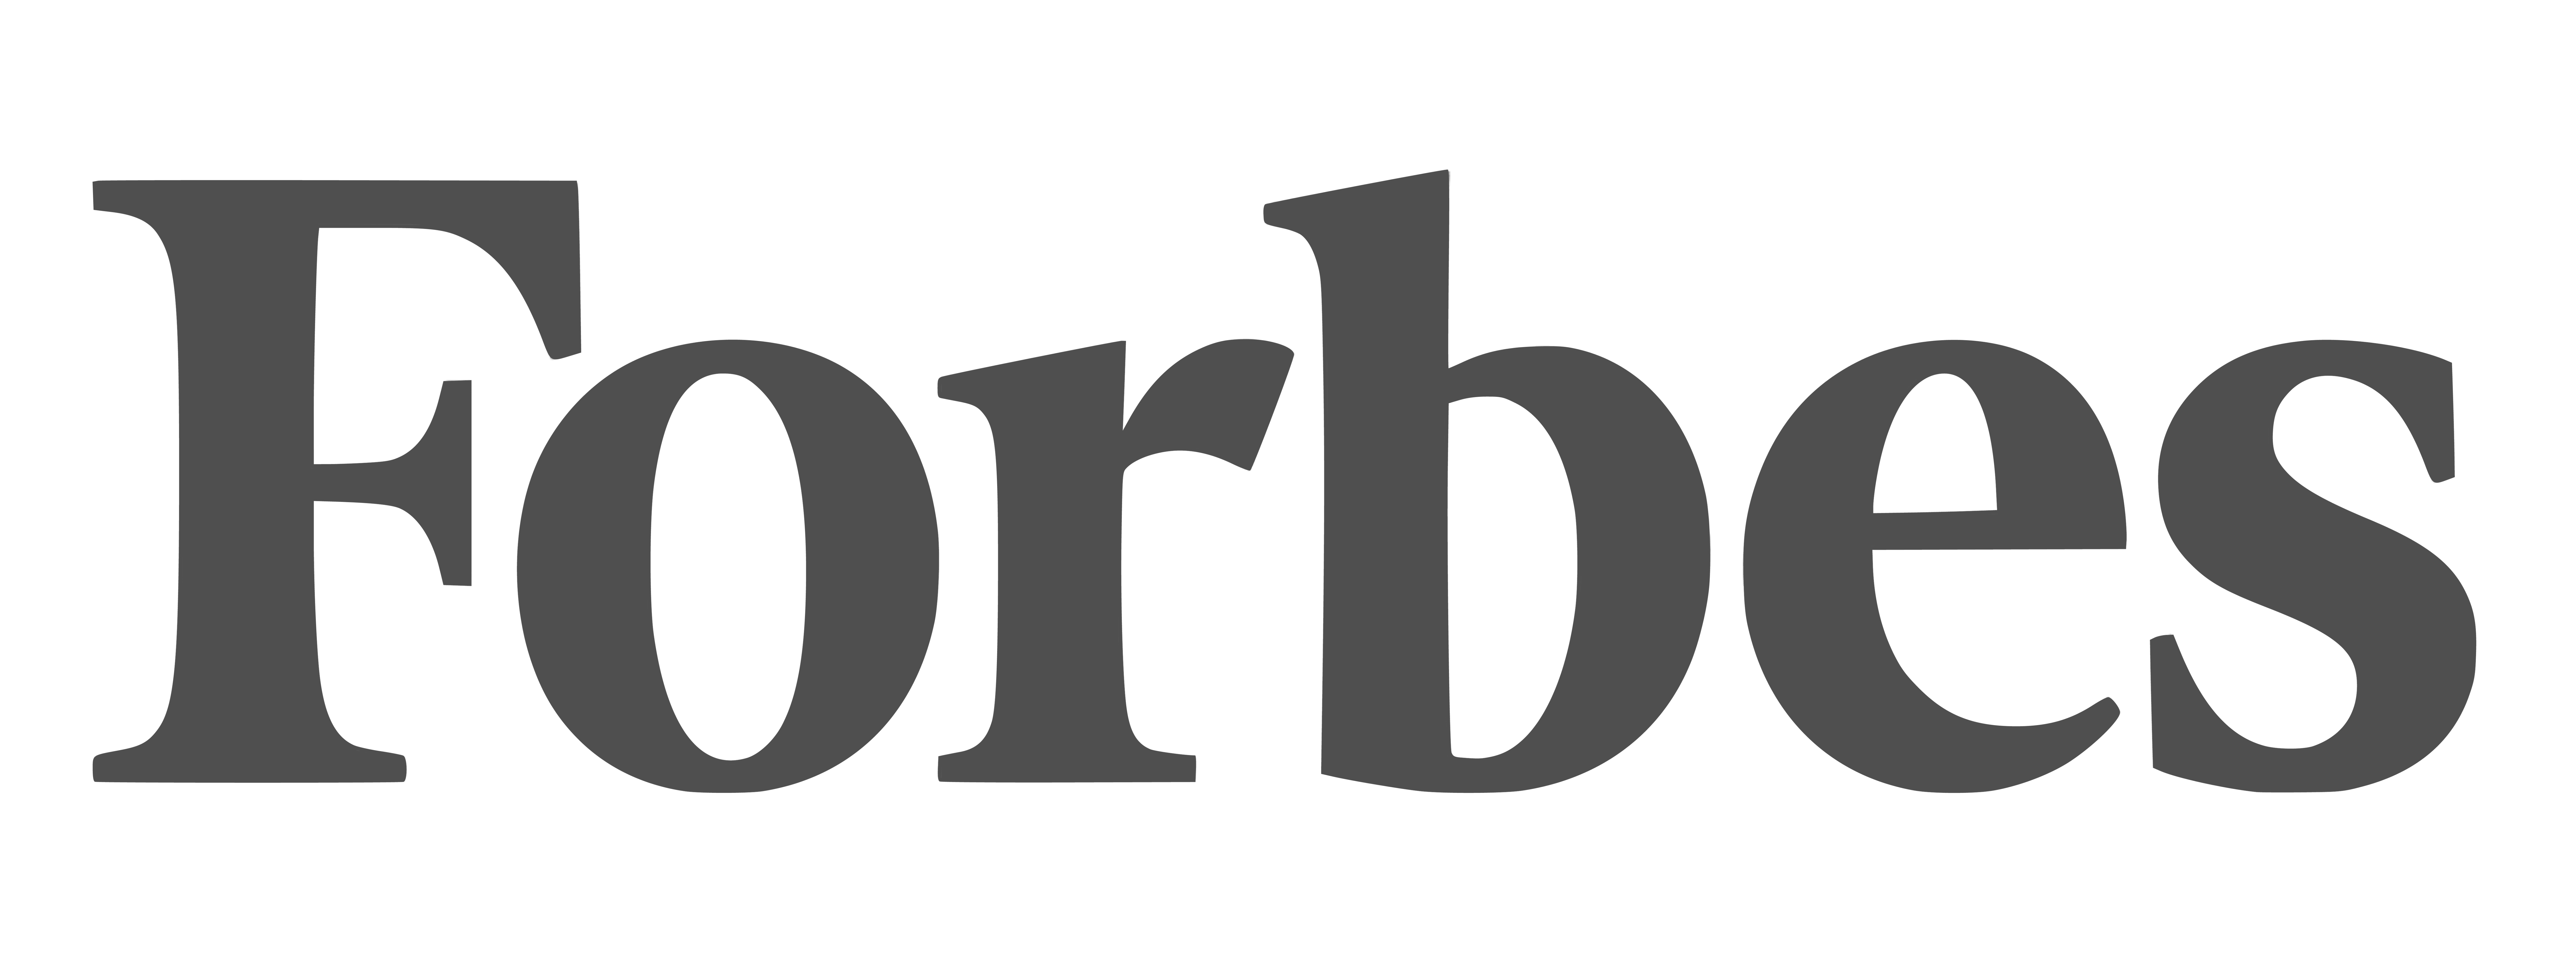 forbes-icon